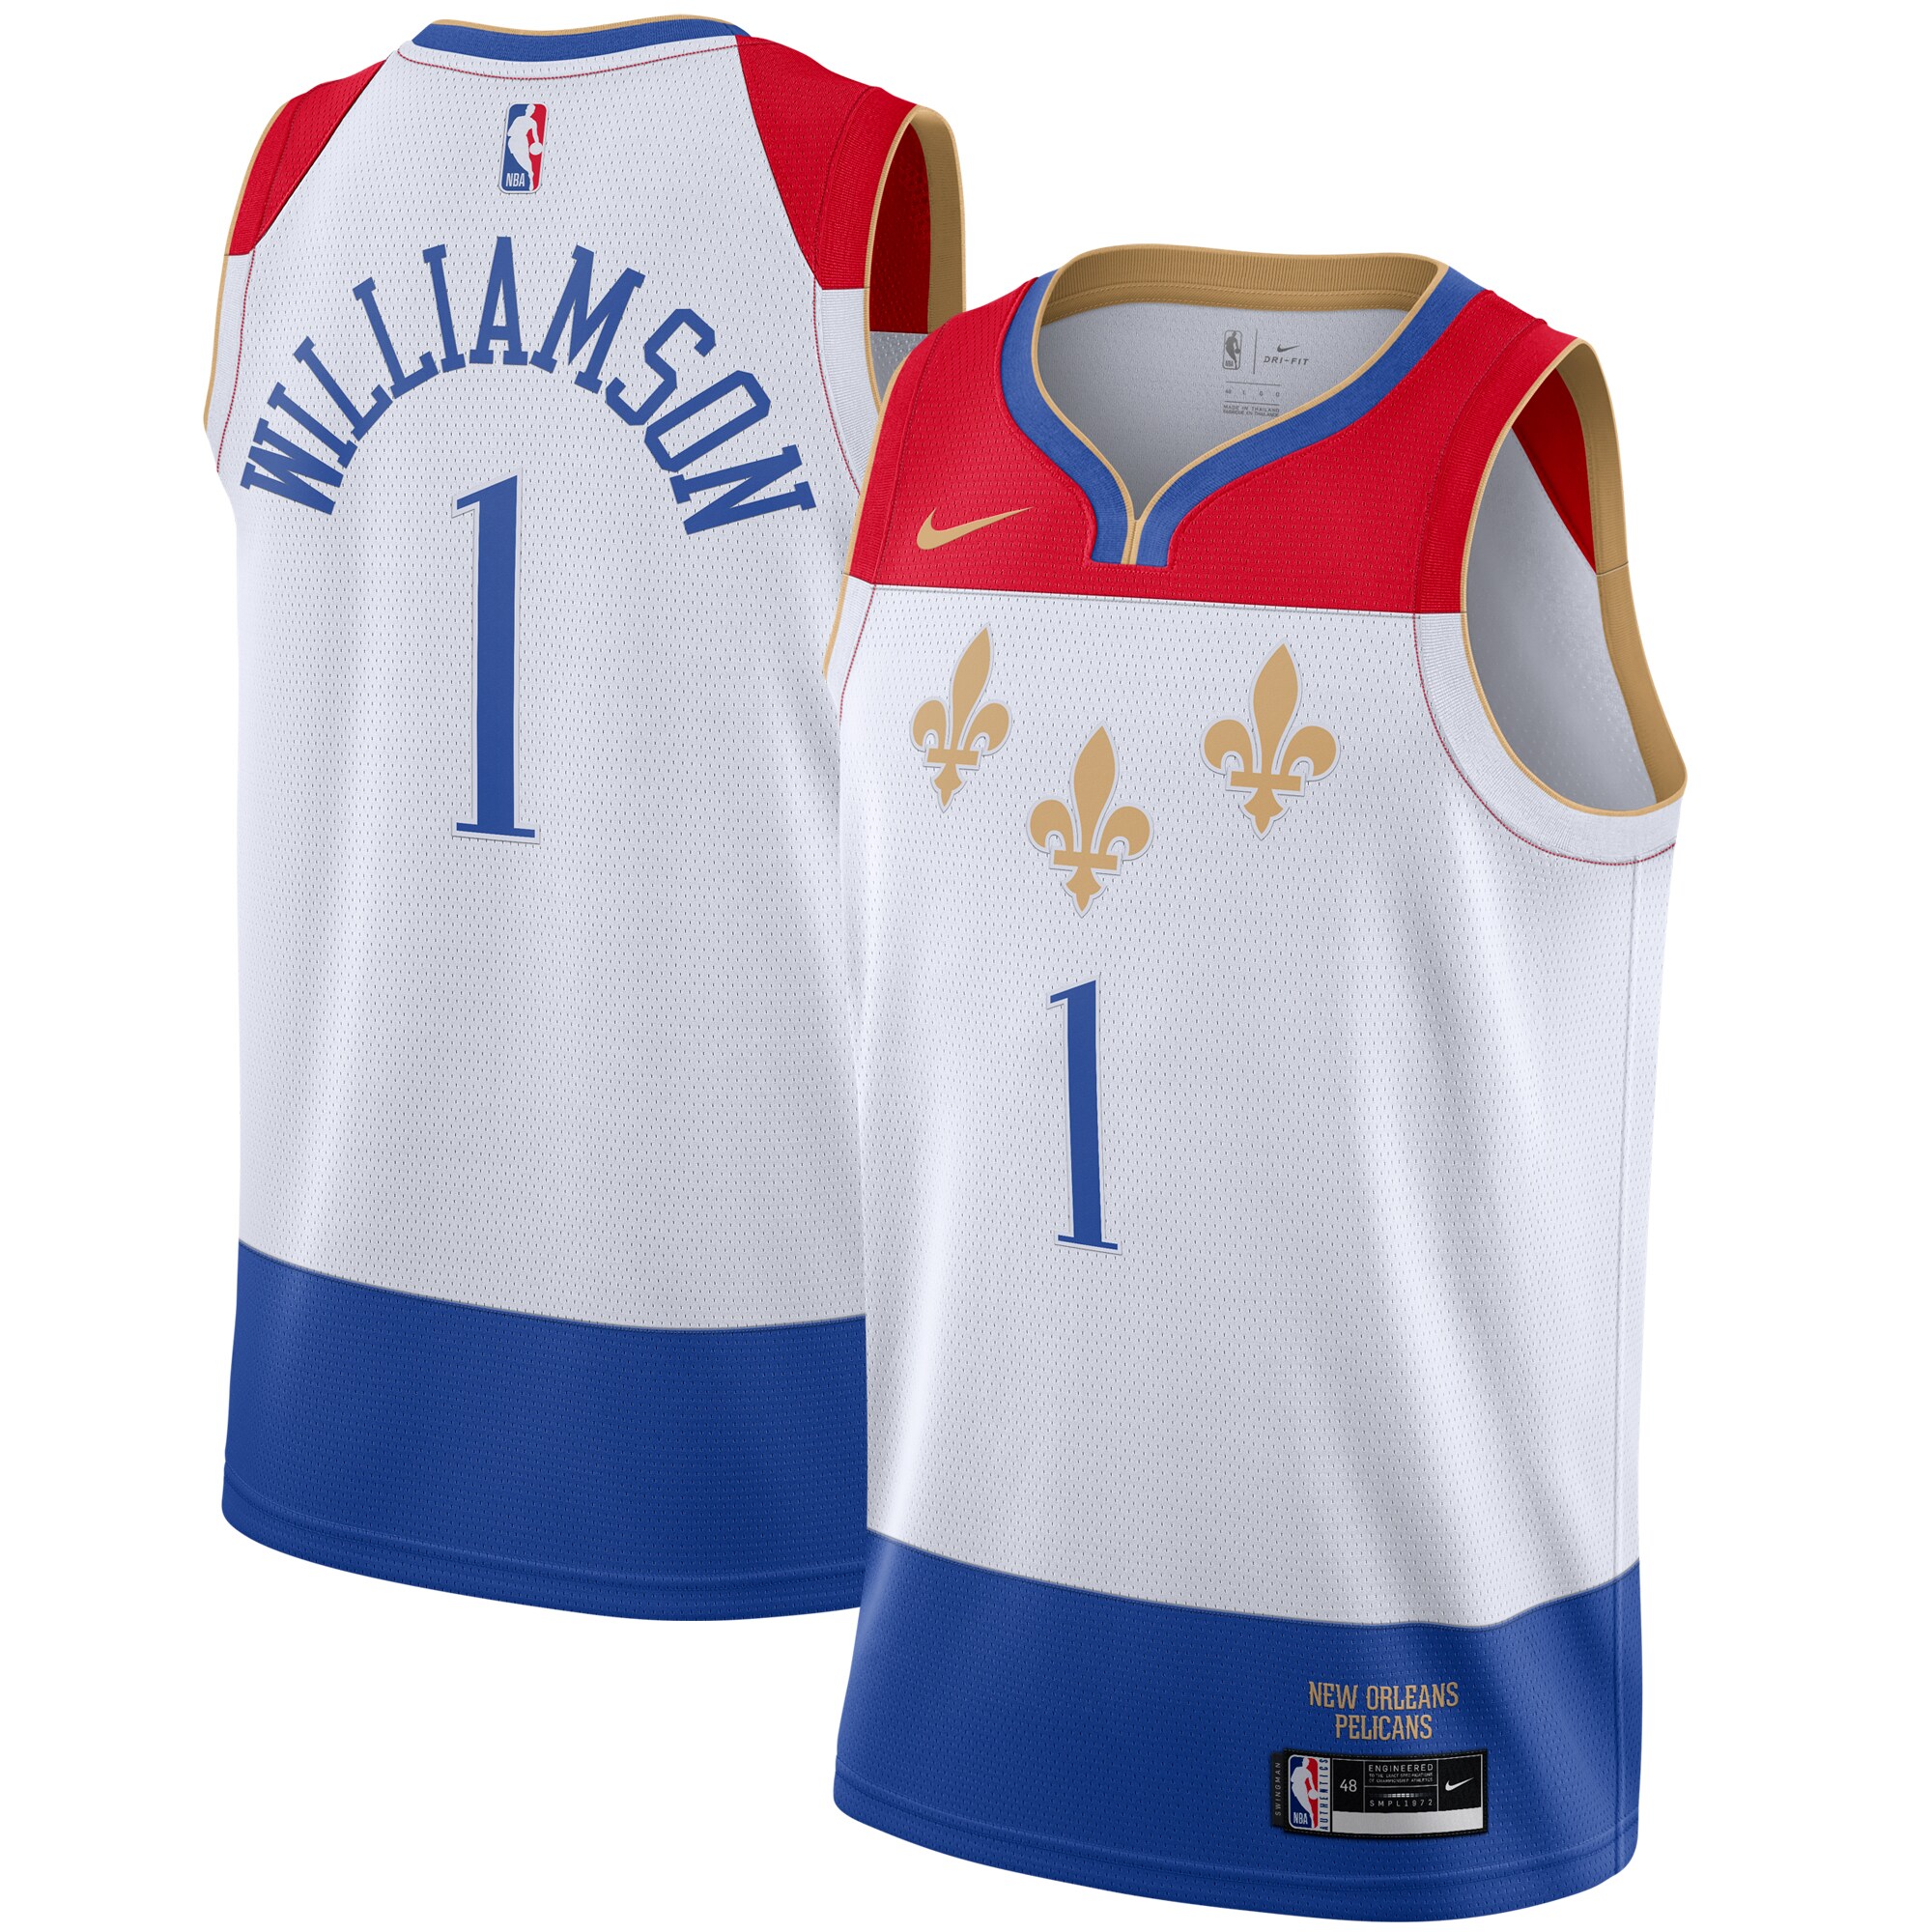 New Orleans Pelicans unveil Nike City Edition uniform inspired by